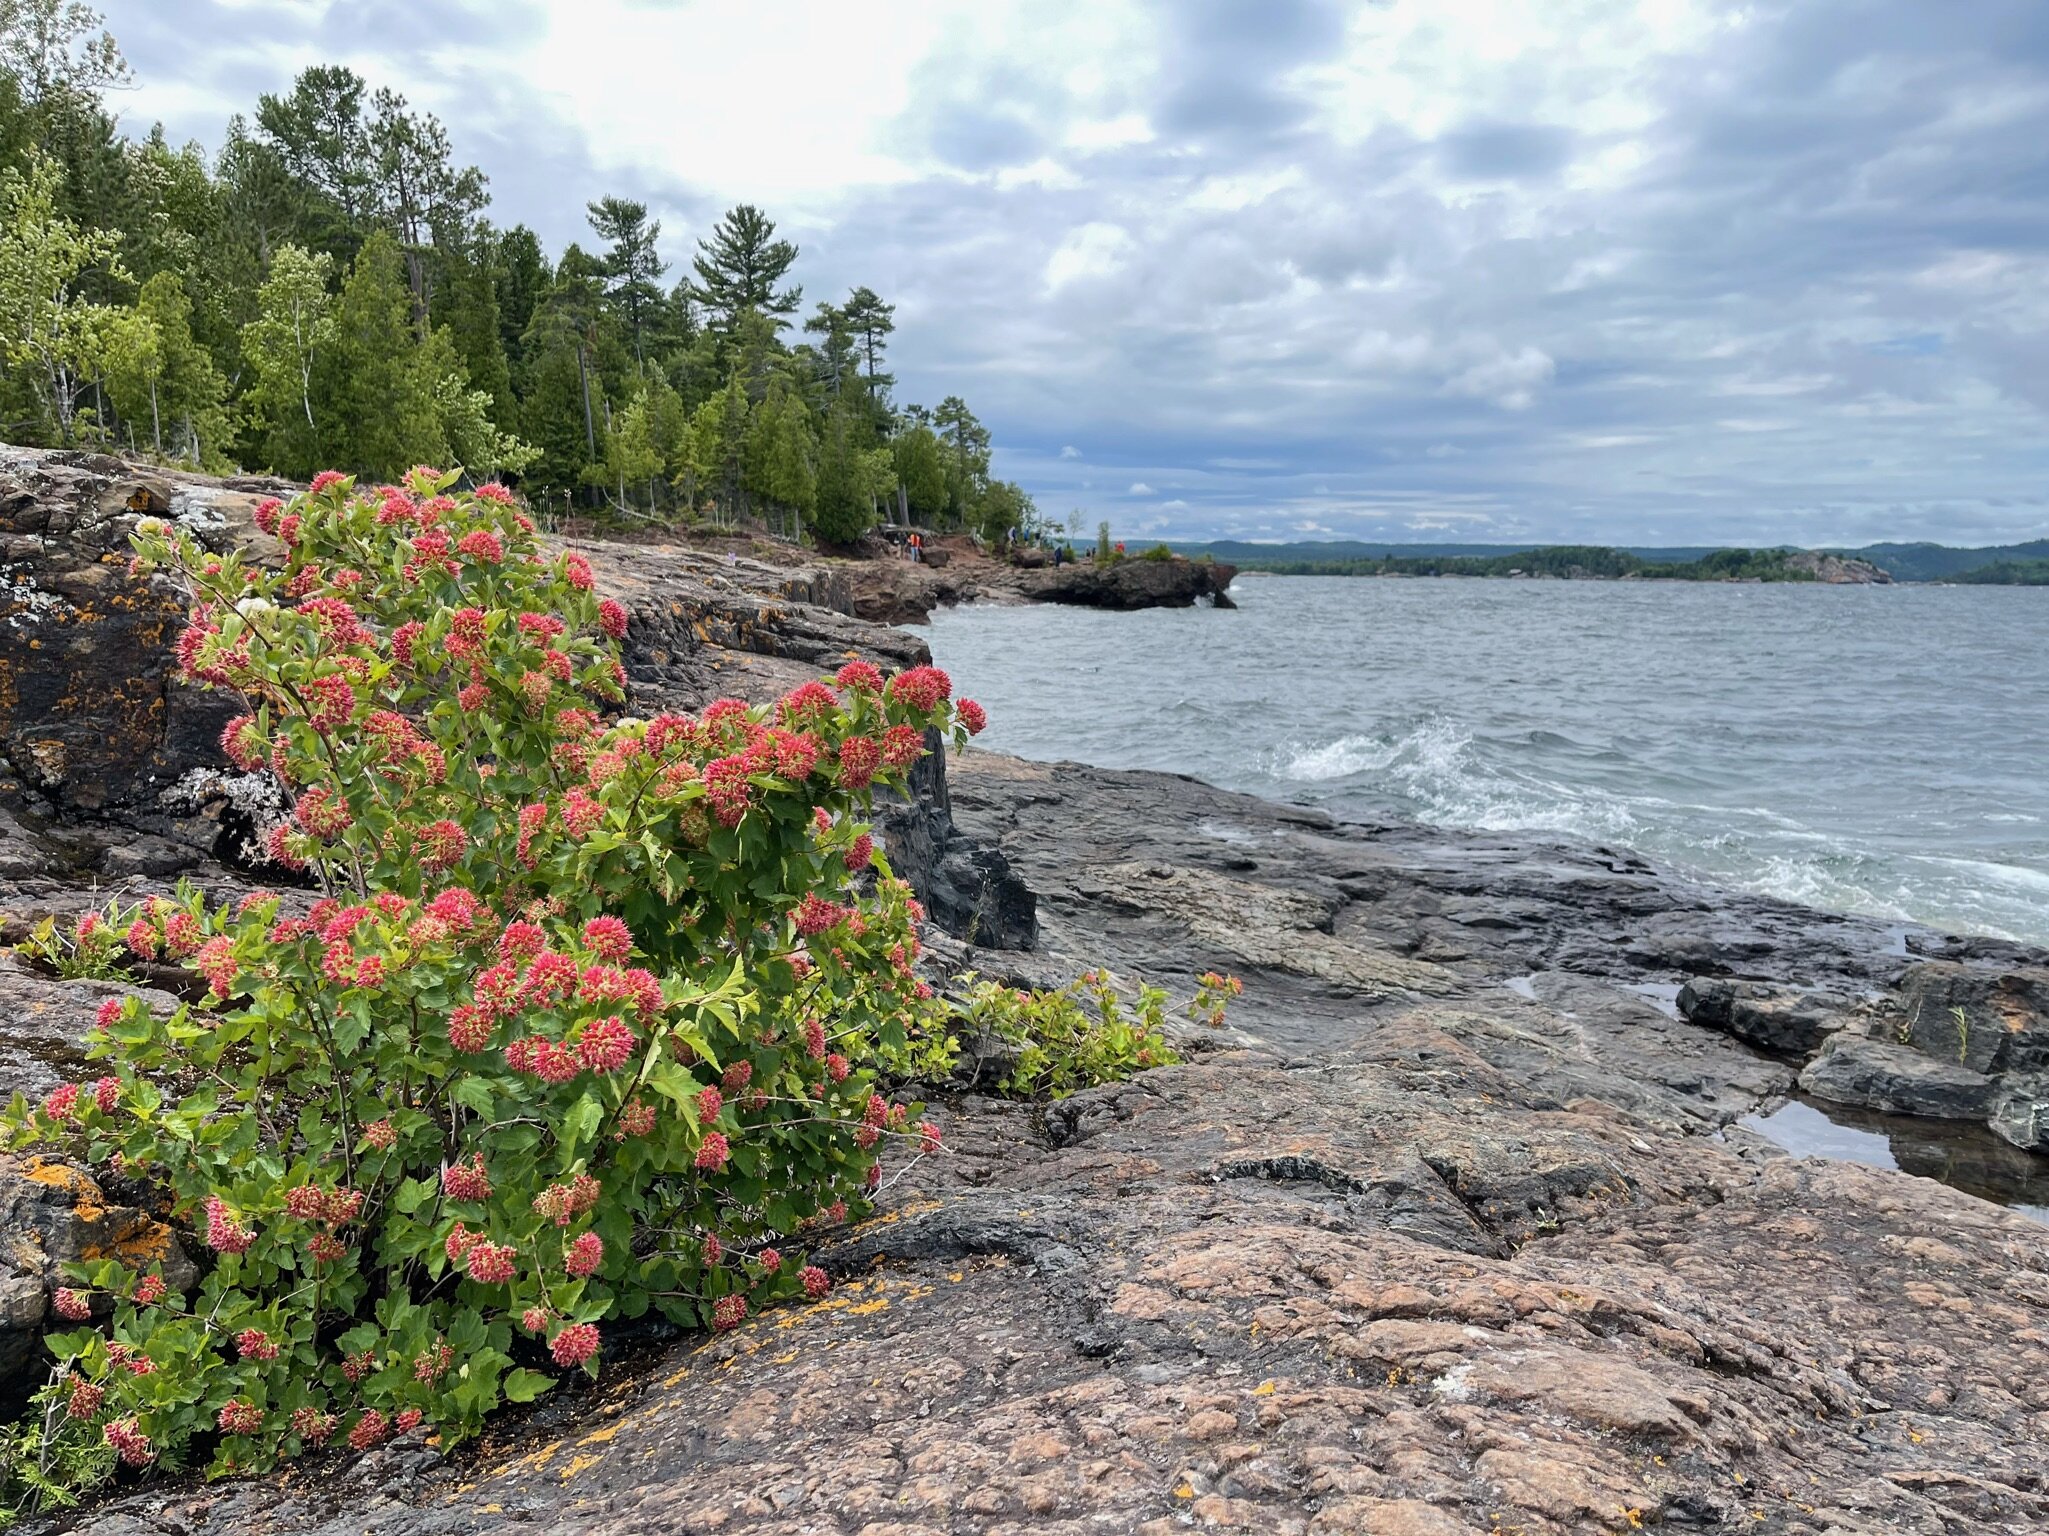  In the upper peninsula,  Presque Isle Park  in the town of  Marquette  was a nice place to hike near the shoreline. It was pretty cold and windy on this day, which we understand is typical even though it’s July.  